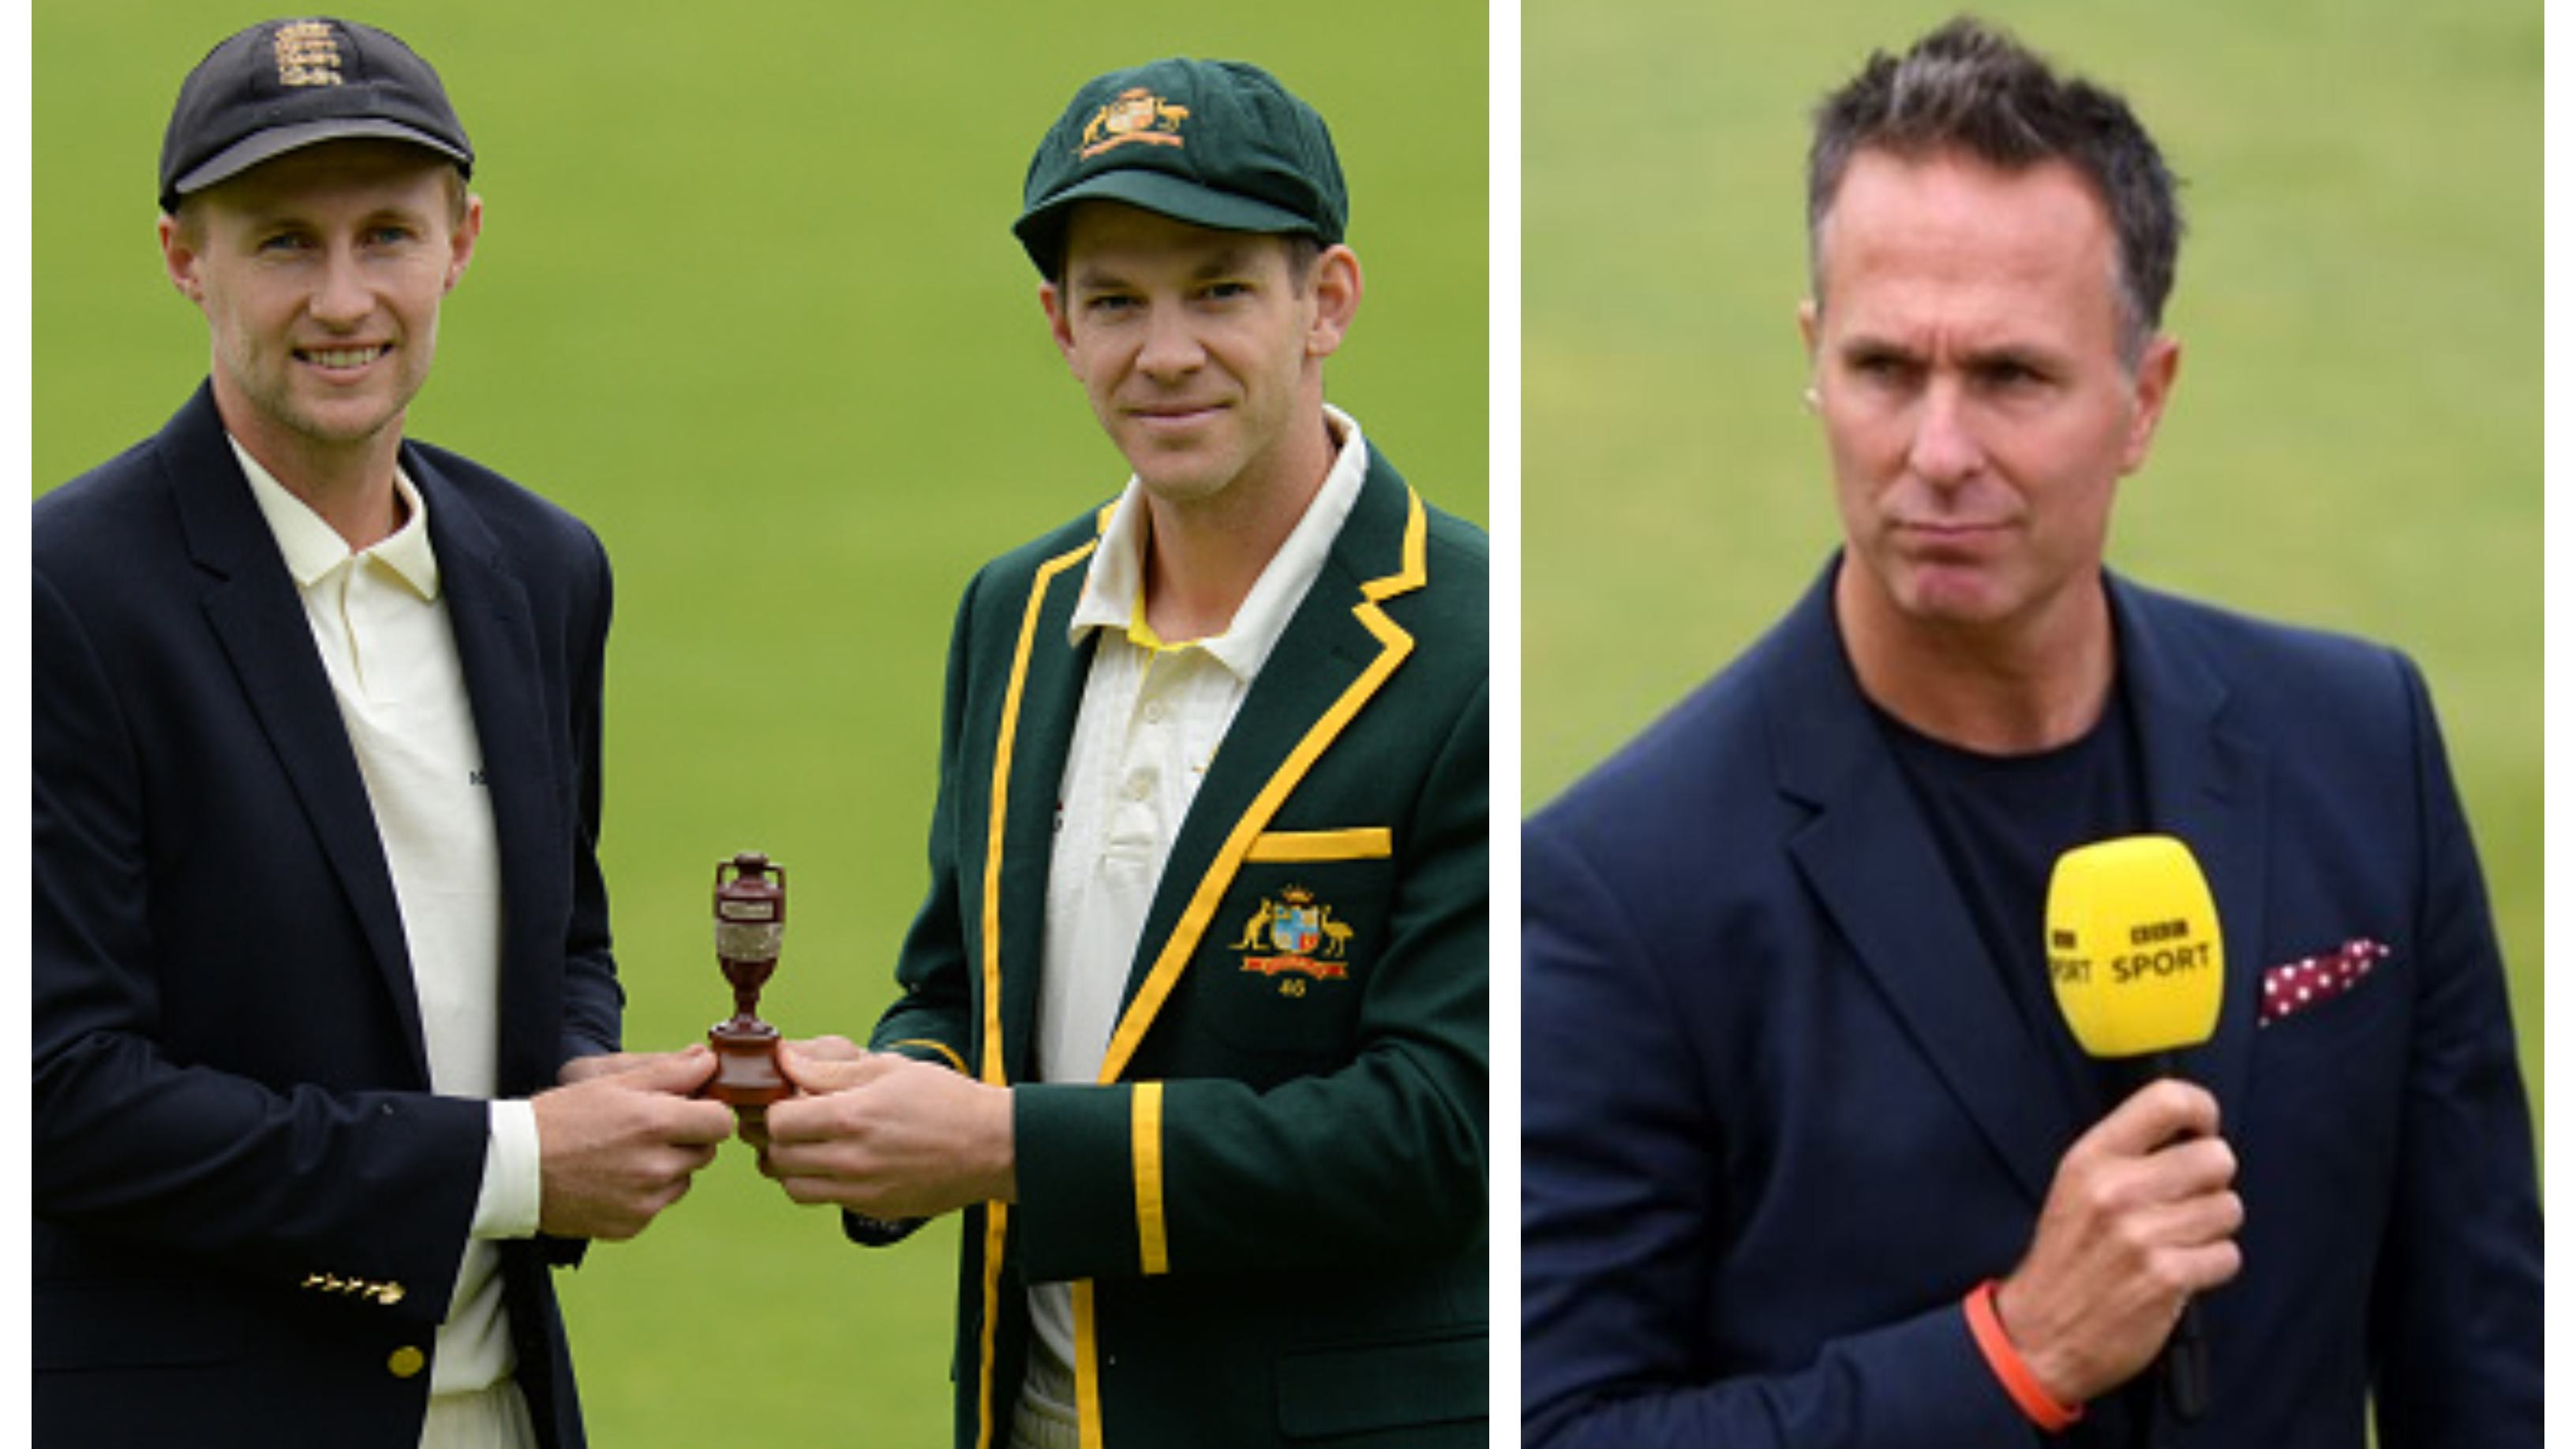 ASHES 2021-22: “He showed a bit of lack of class”, Vaughan critical of Paine’s comments on Root